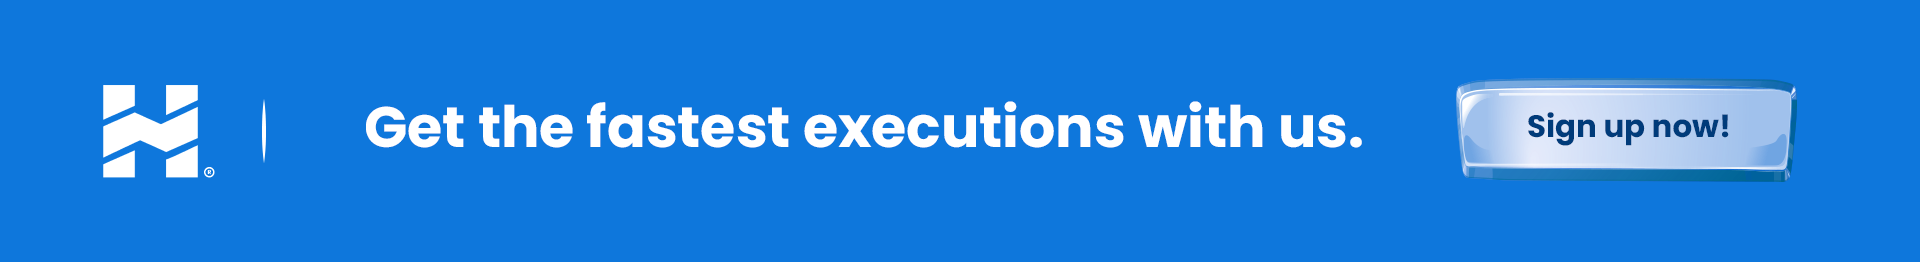 Get the fastest executions with us